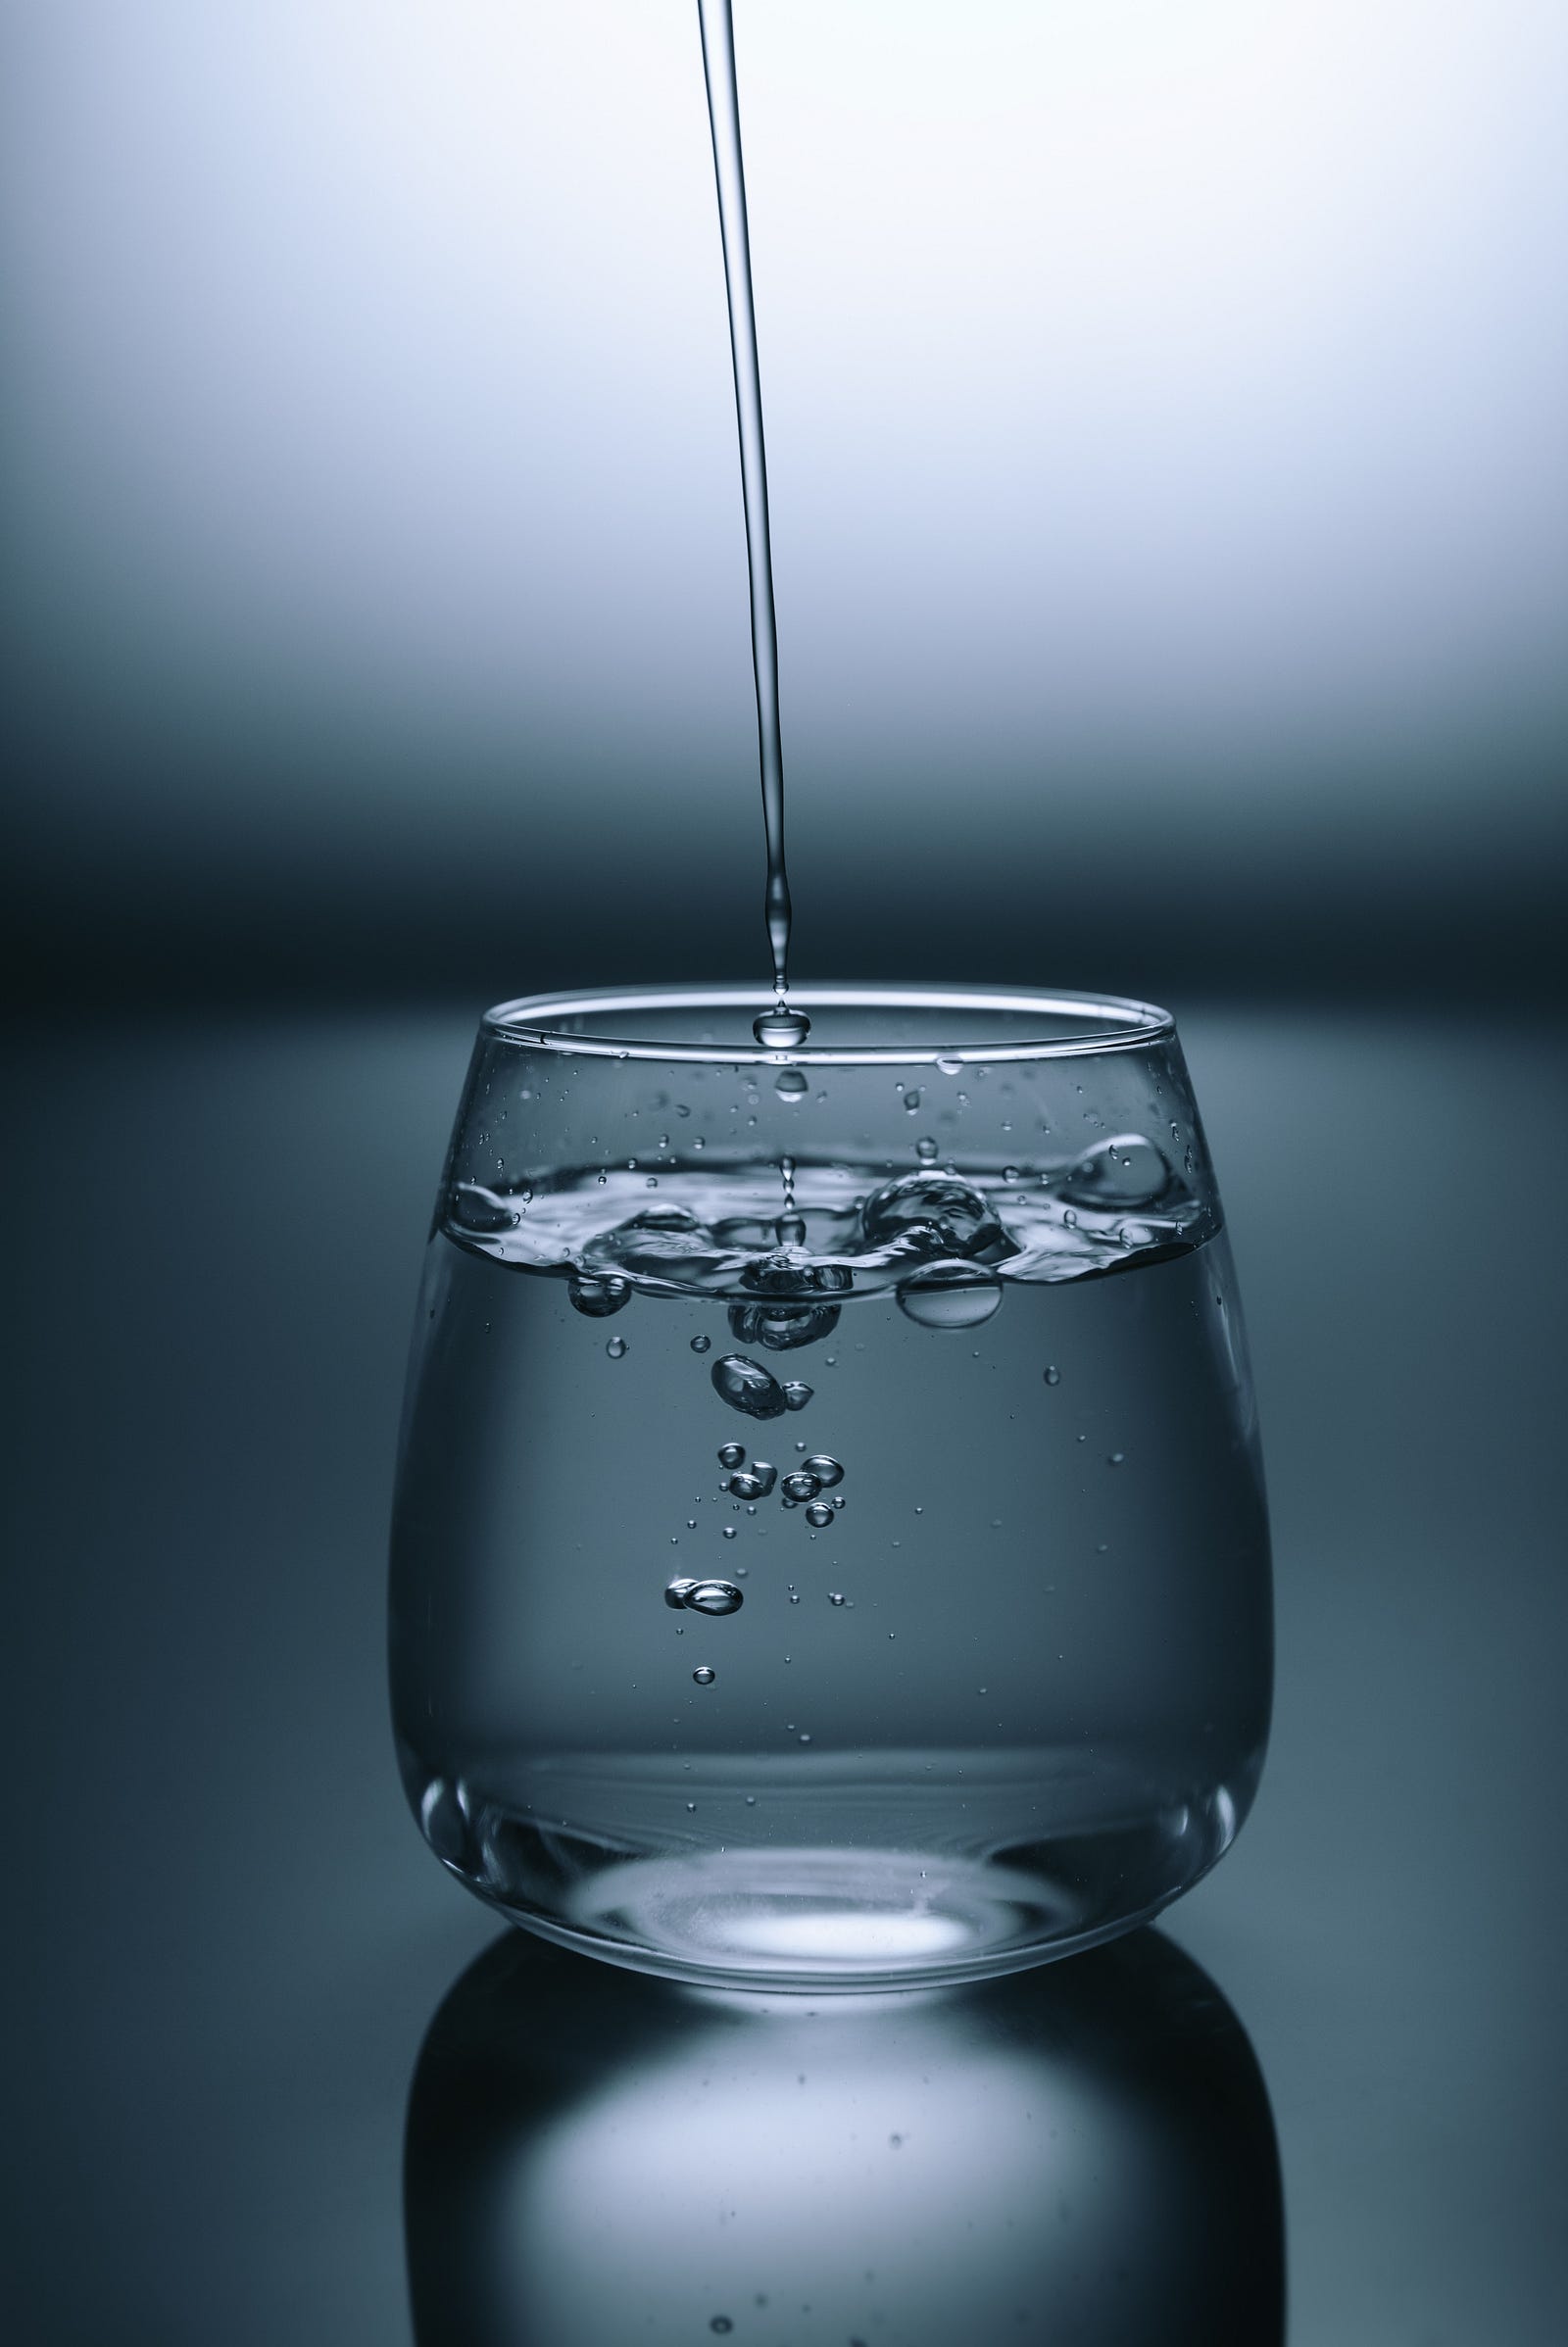 A single, narrow stream of water pours into a medium-sized glass from above. The glass is nearly full. Drinking plenty of water throughout the day is important for your overall health and can help regulate body temperature during sleep. Keep a glass of water by your bedside to sip on if you wake up thirsty during the night.